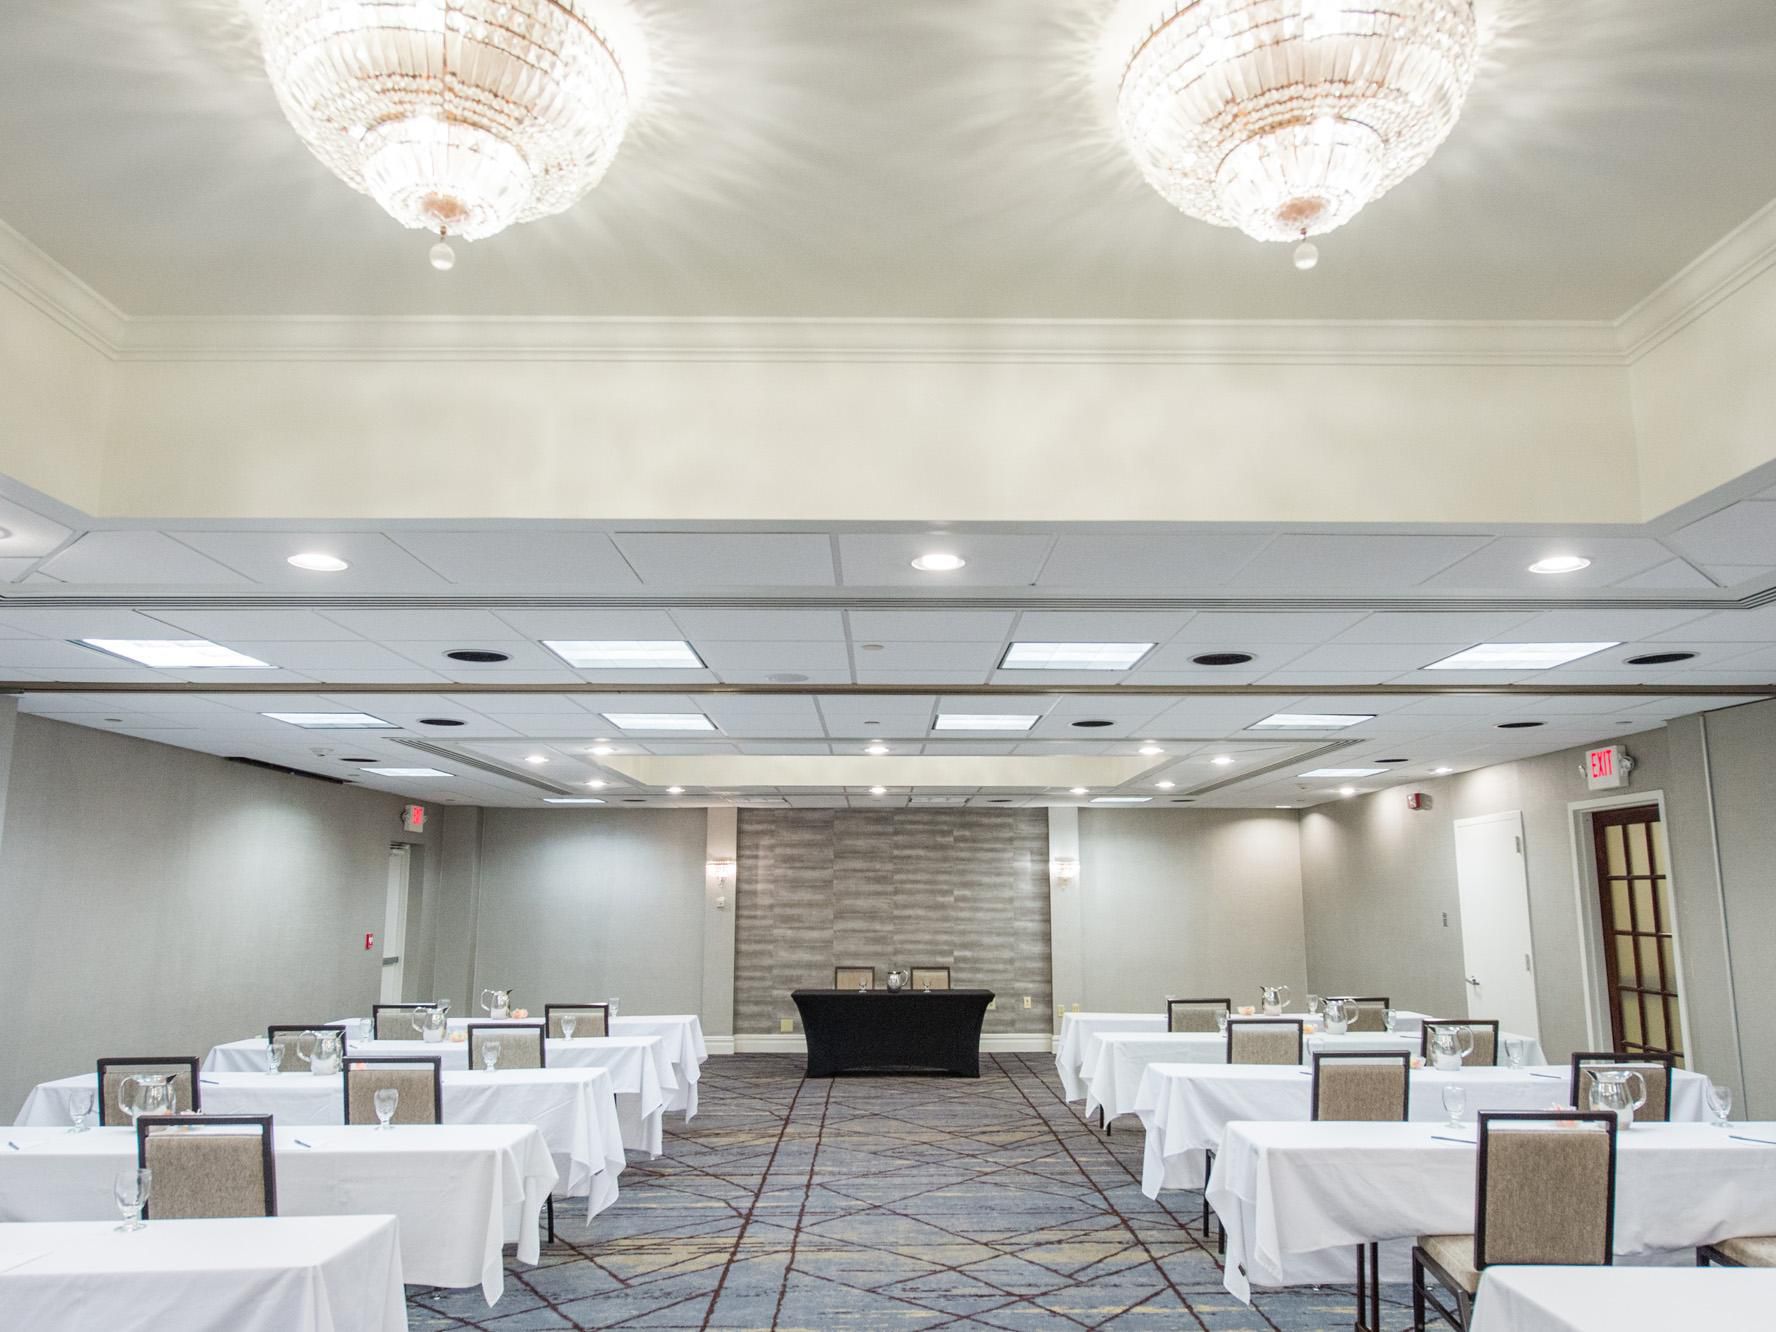 Enjoy the comfort and luxury of our newly renovated function space. Whether you are looking for a location for a corporate meeting, wedding, reception, social event, or any type of group event, we offer 12,000 sq. ft. of flexible space. From boardrooms to ballrooms, we have the ideal space for your event needs.